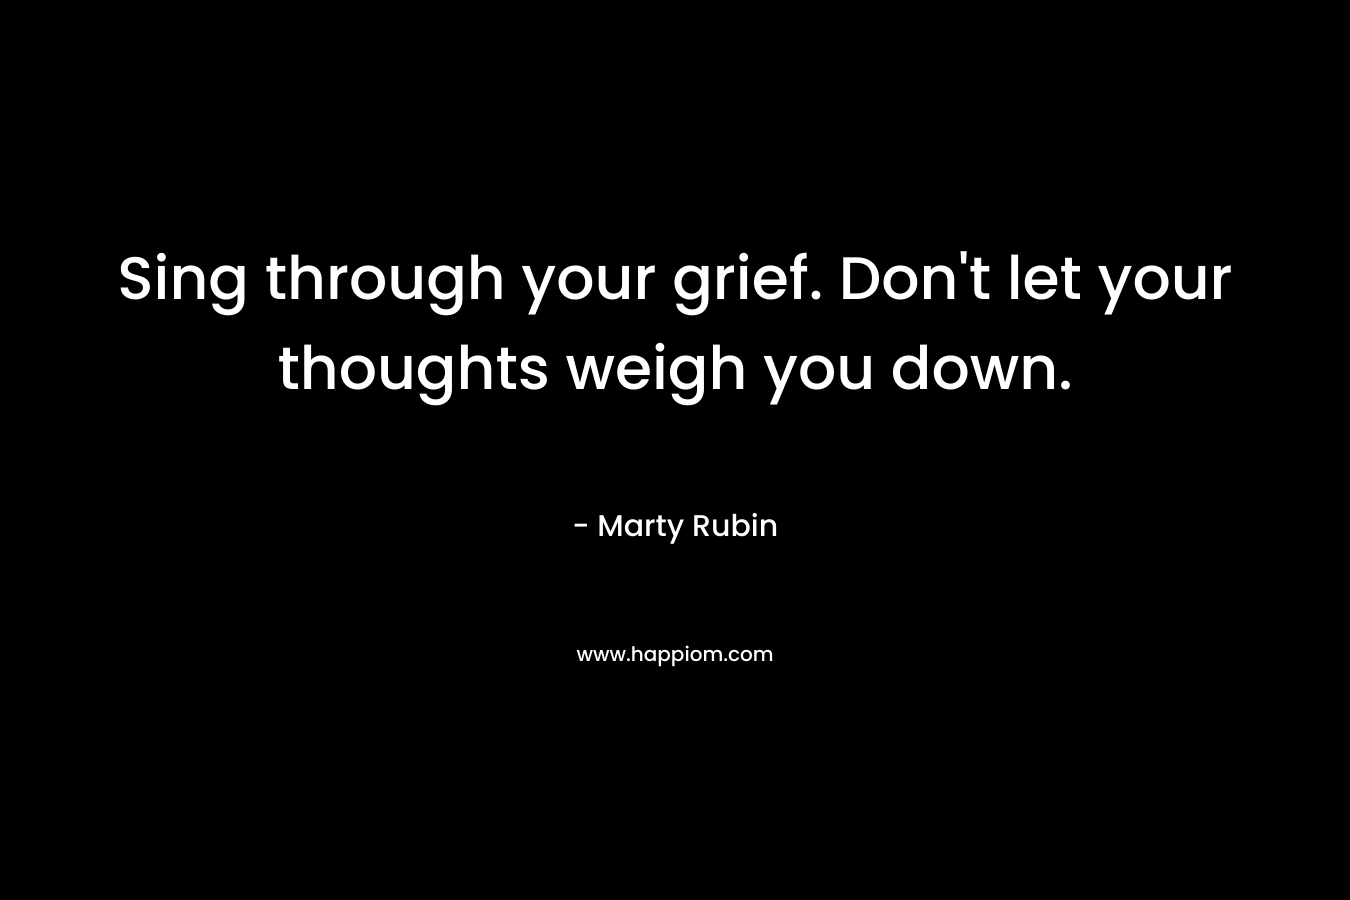 Sing through your grief. Don't let your thoughts weigh you down.